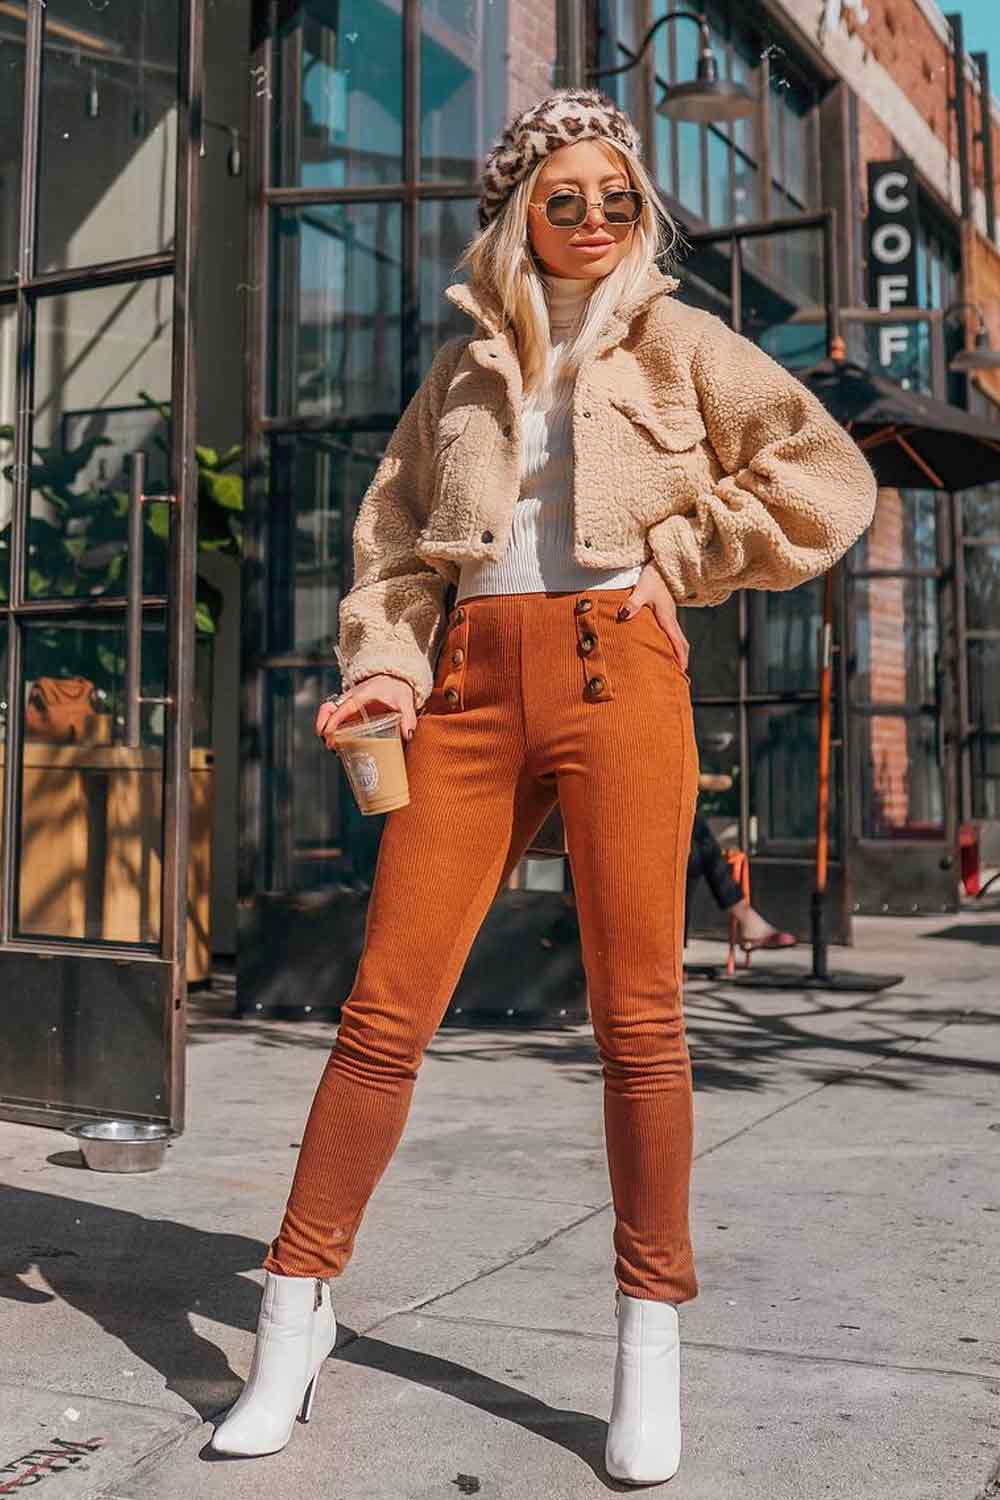 Fur Jacket with Orange Pants Outfits